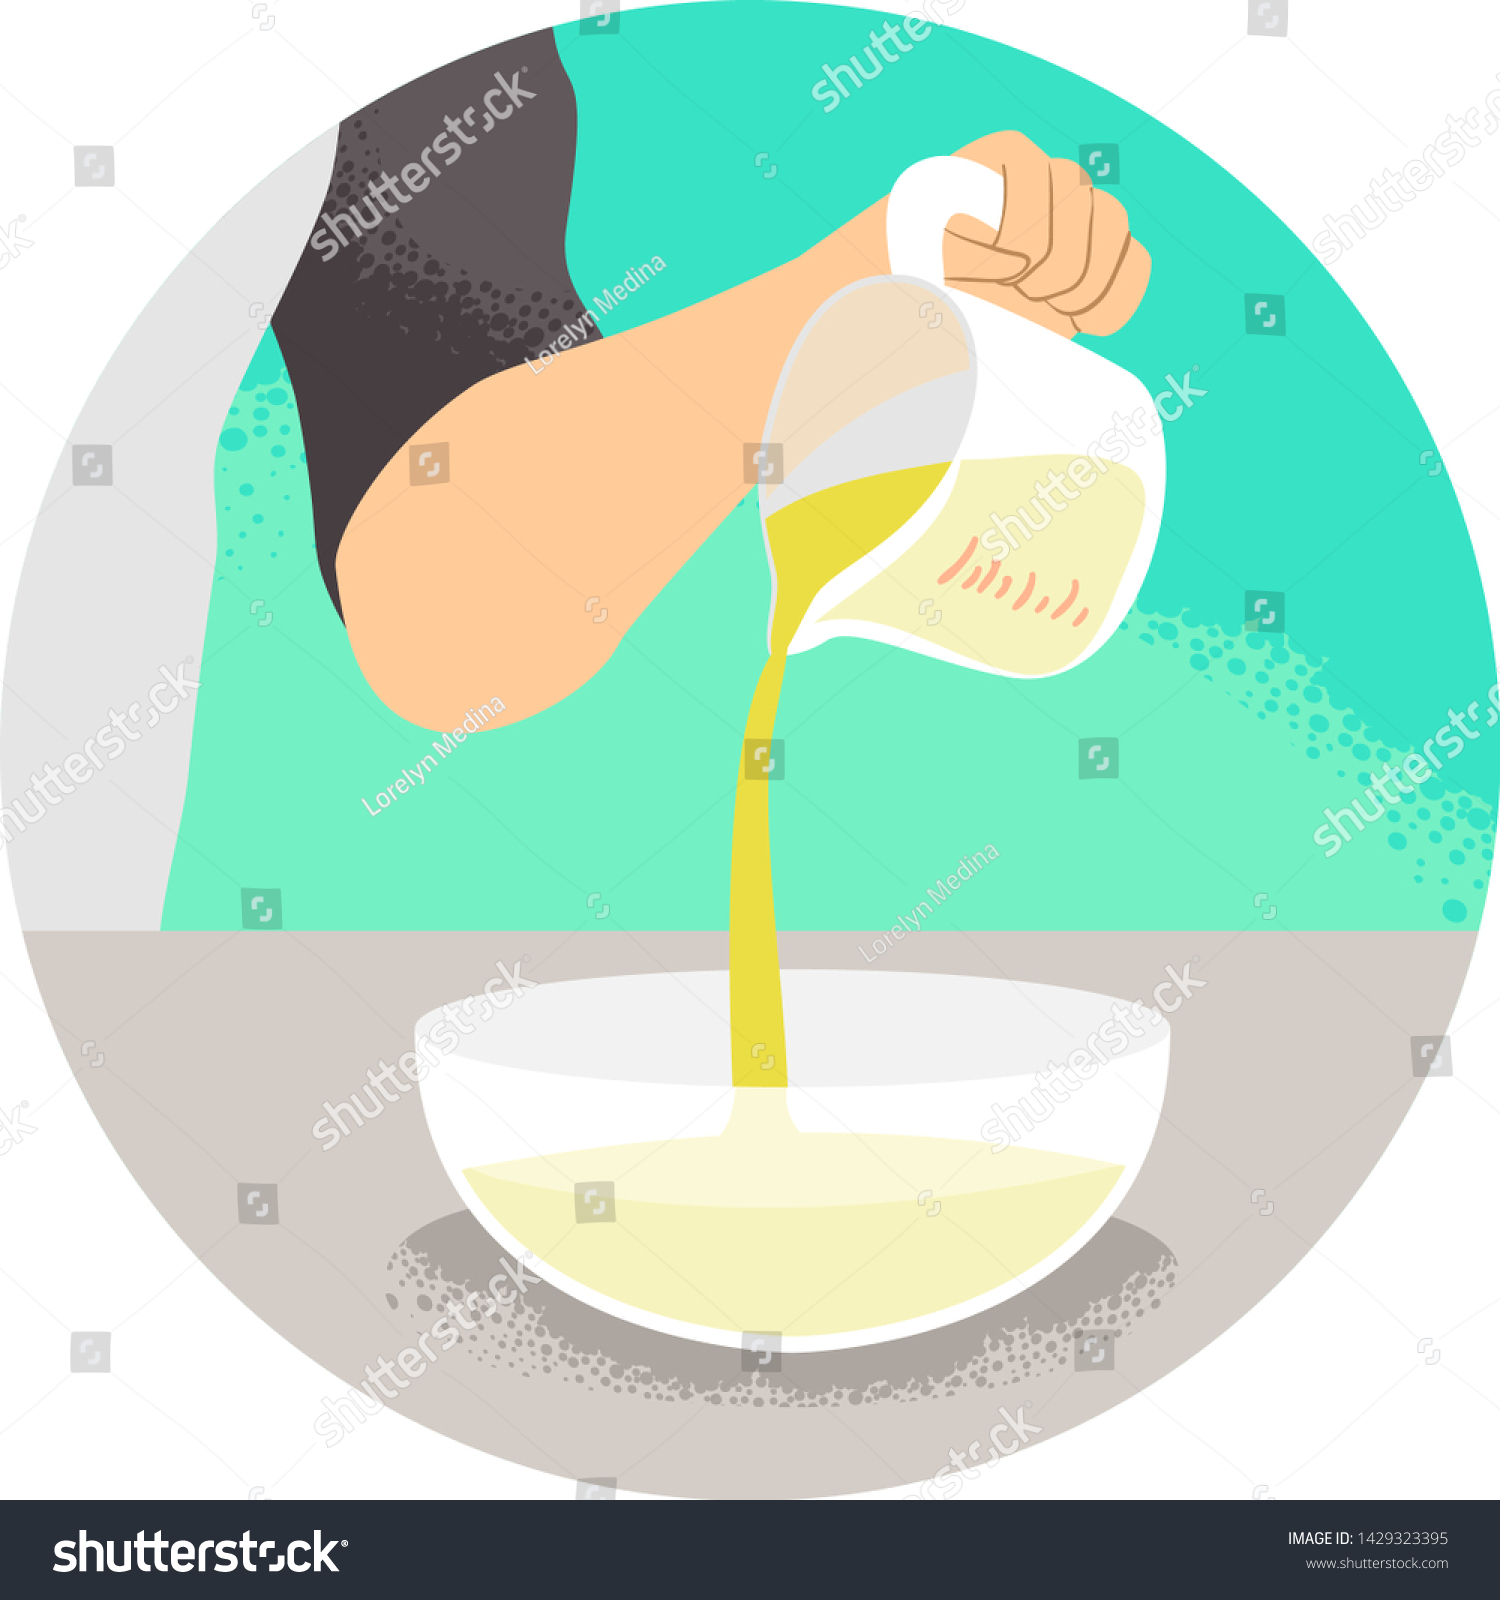 Illustration Hand Holding Measurement Pitcher Pouring Stock Vector ...